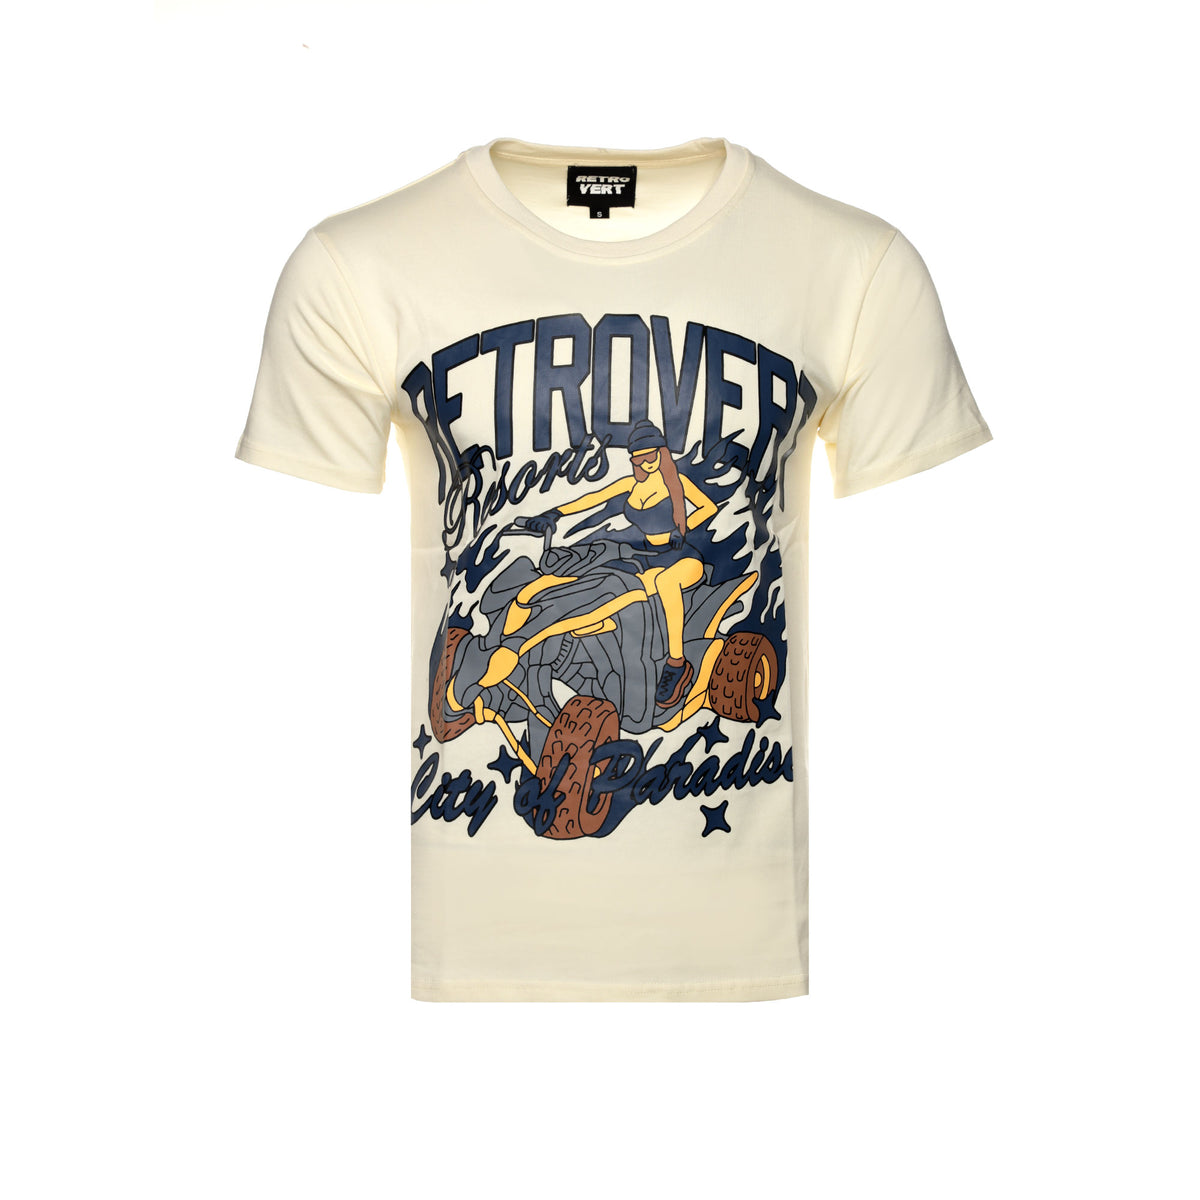 Retrovert "City of Paradise" Men's SS Graphic Tee - SIZE Boutique